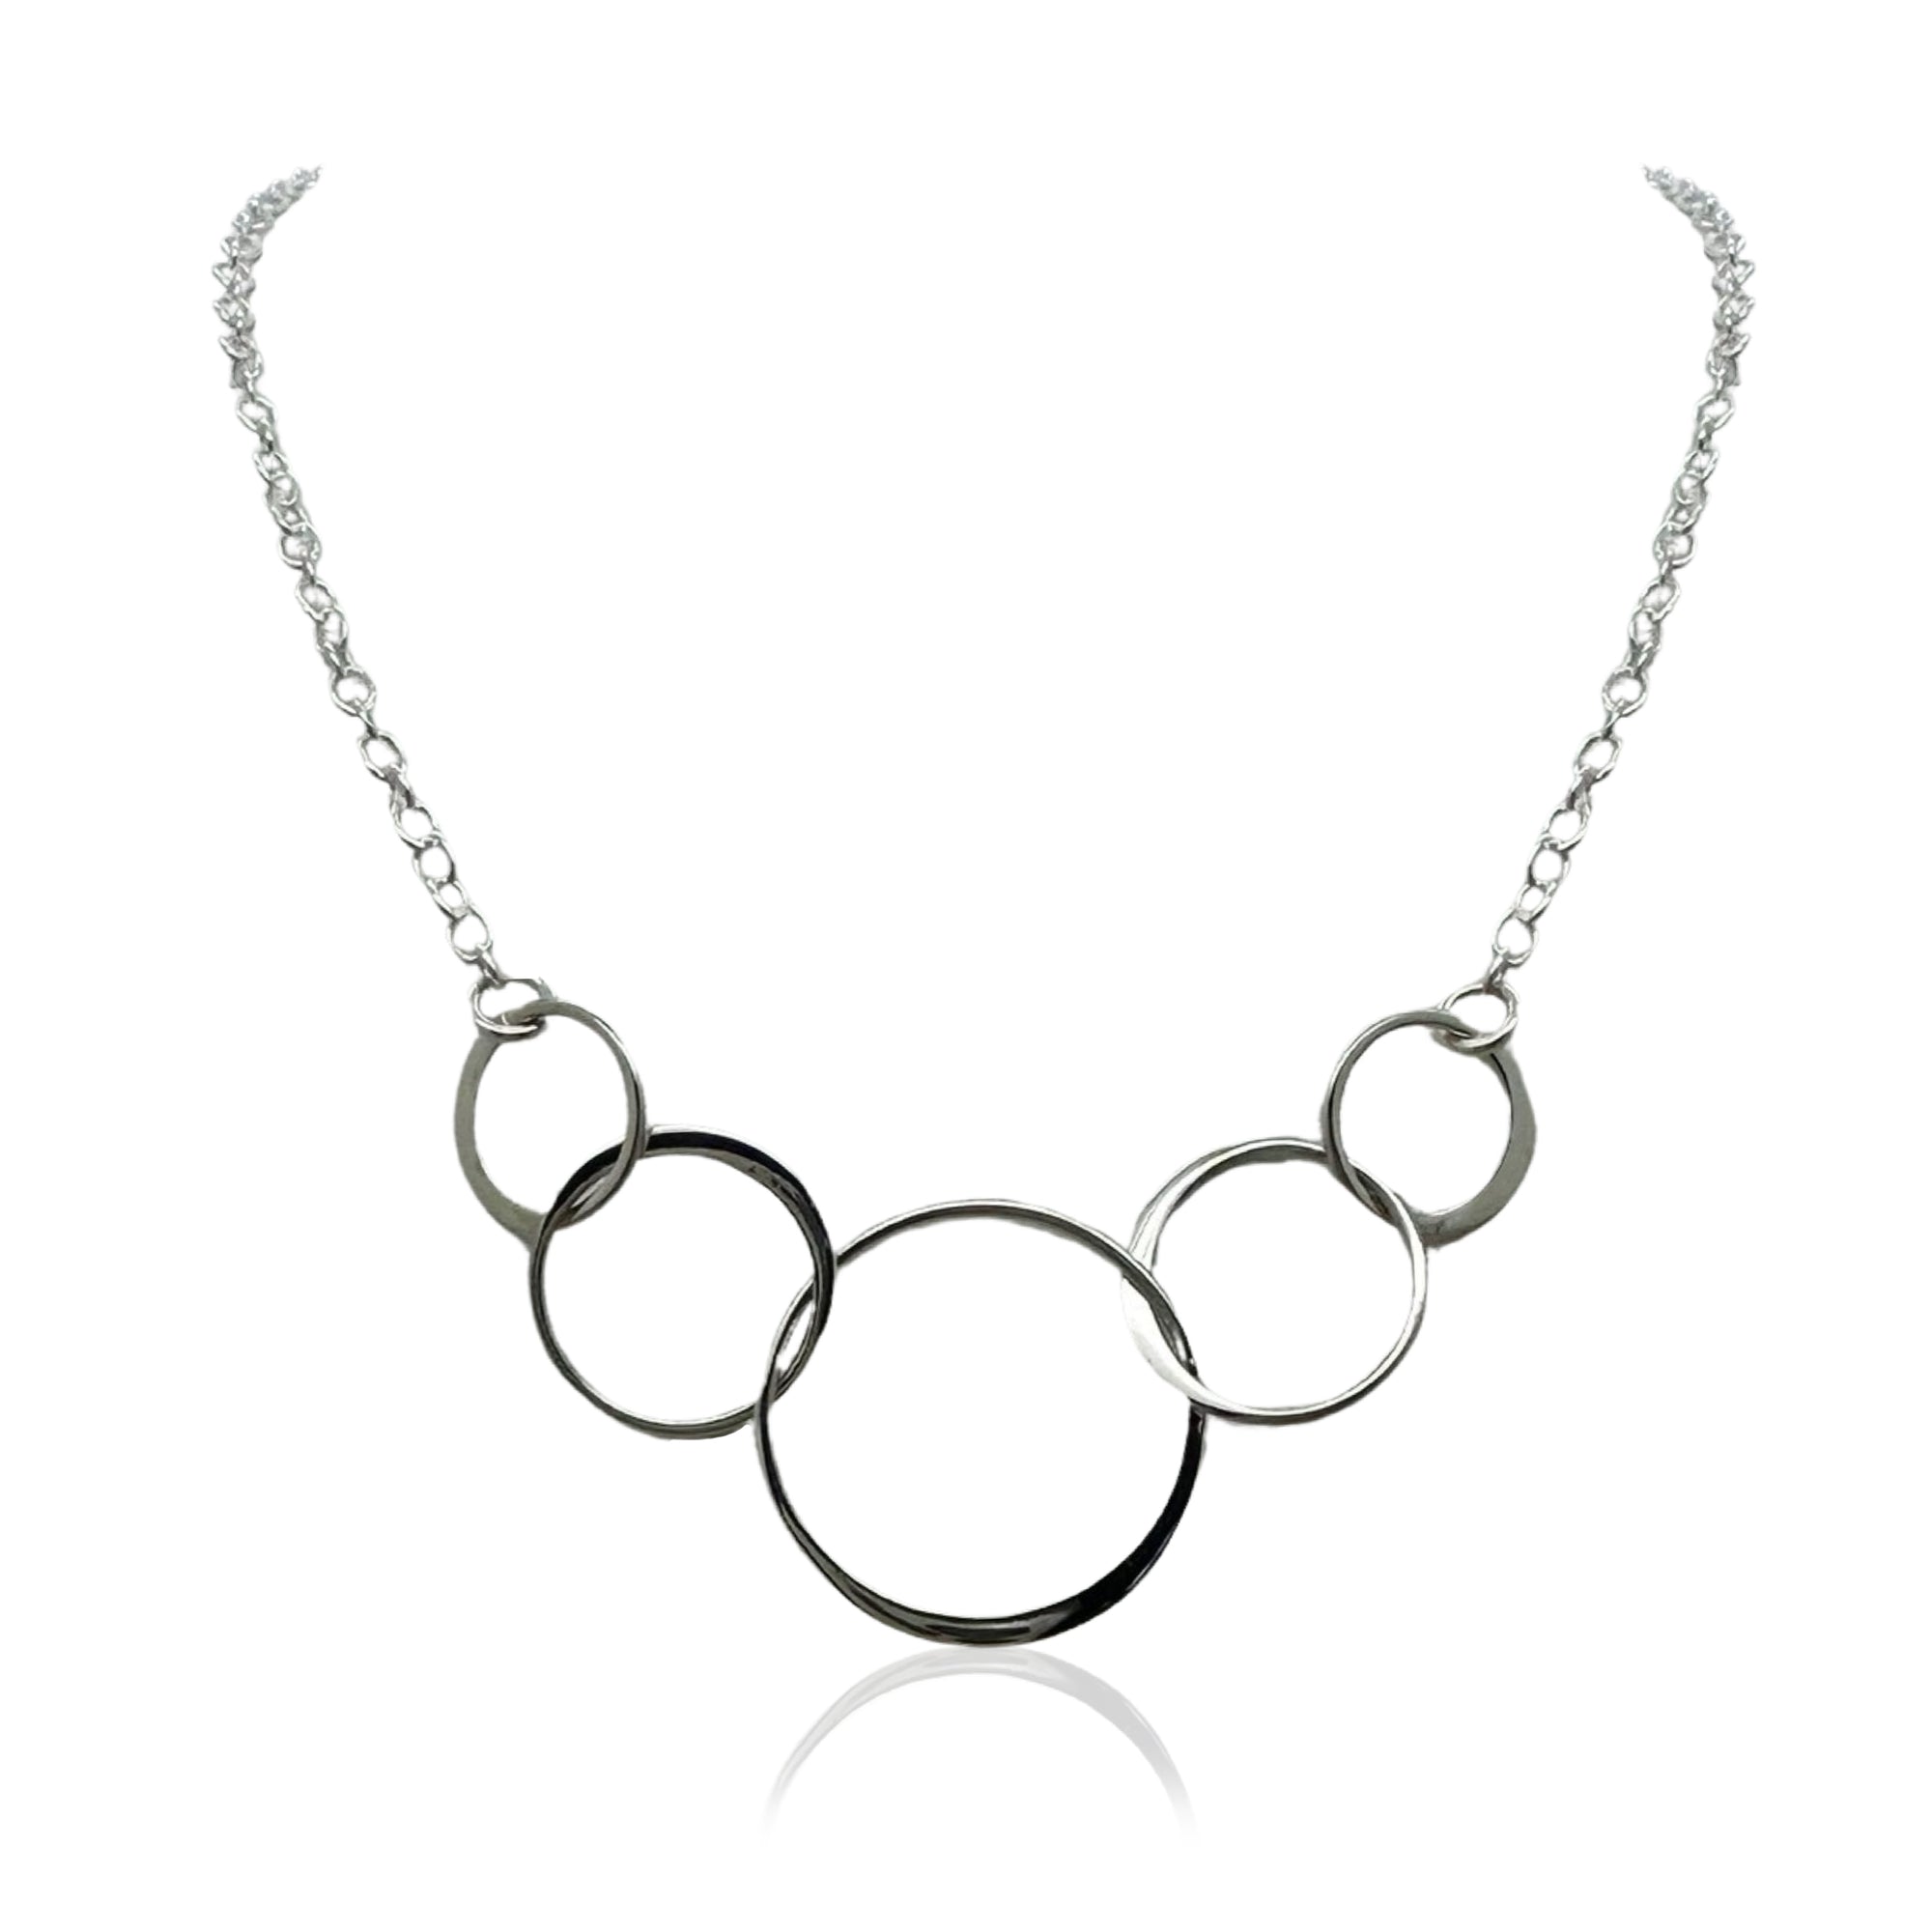 5 Circle Connection Necklace